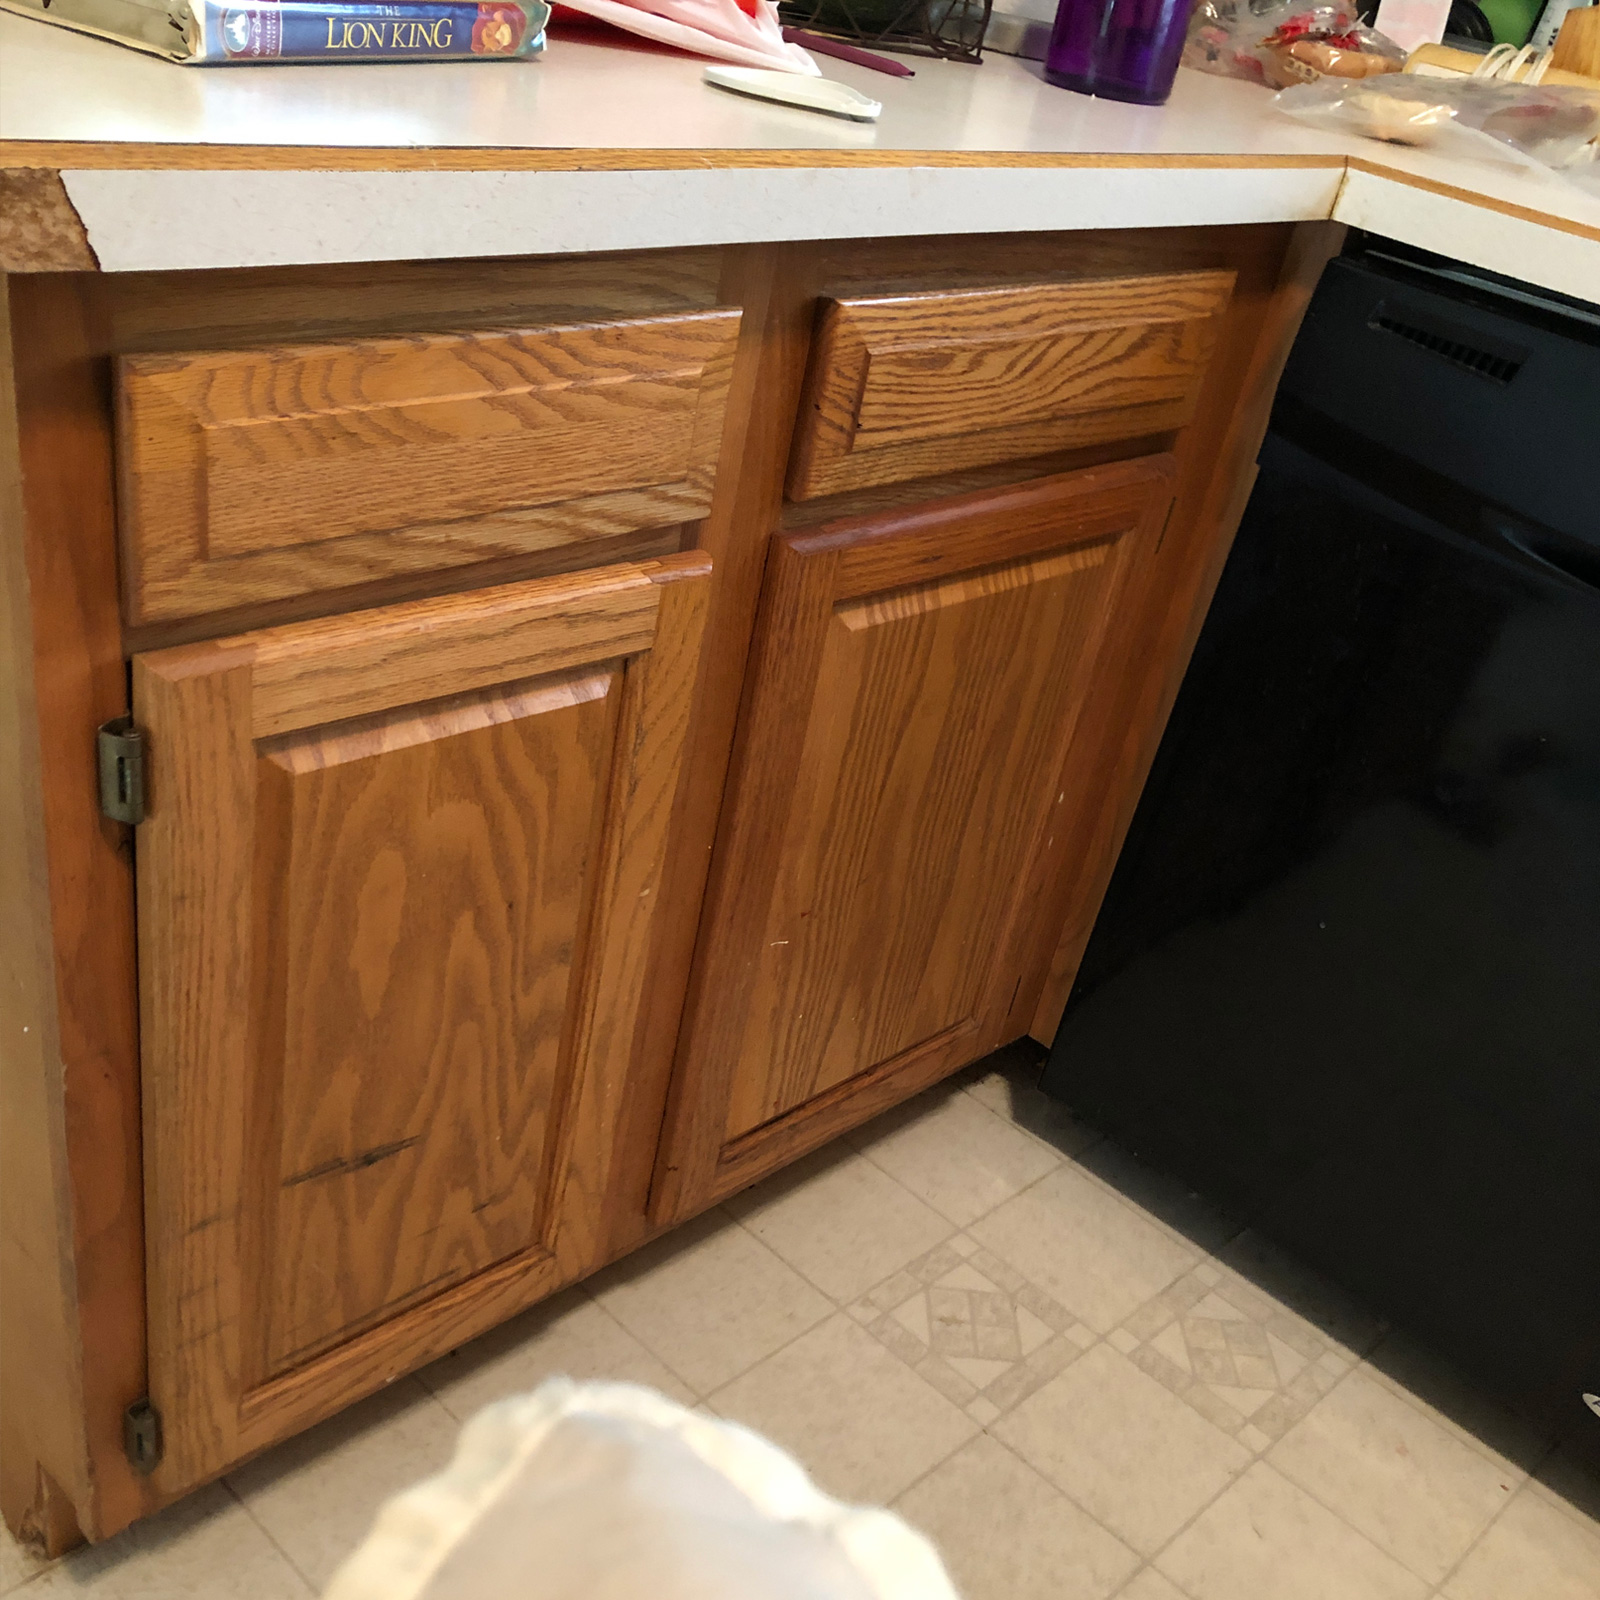 Entry 3 - These worn out cabinets make for a tired kitchen